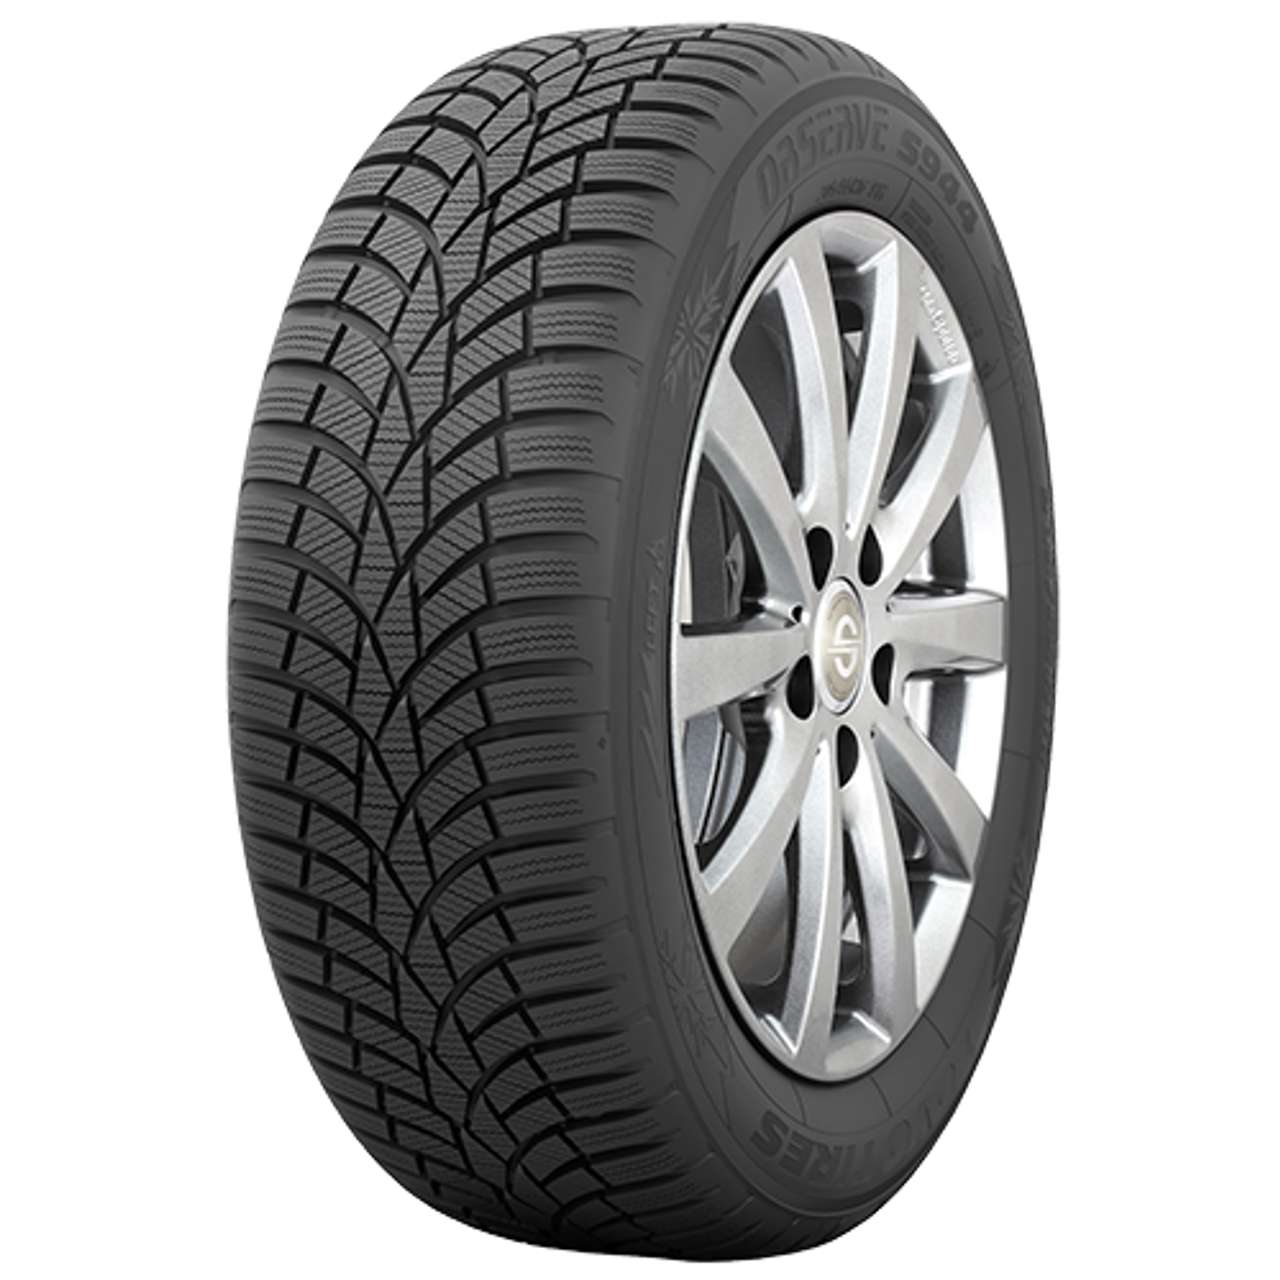 TOYO OBSERVE S944 225/55R18 102V BSW